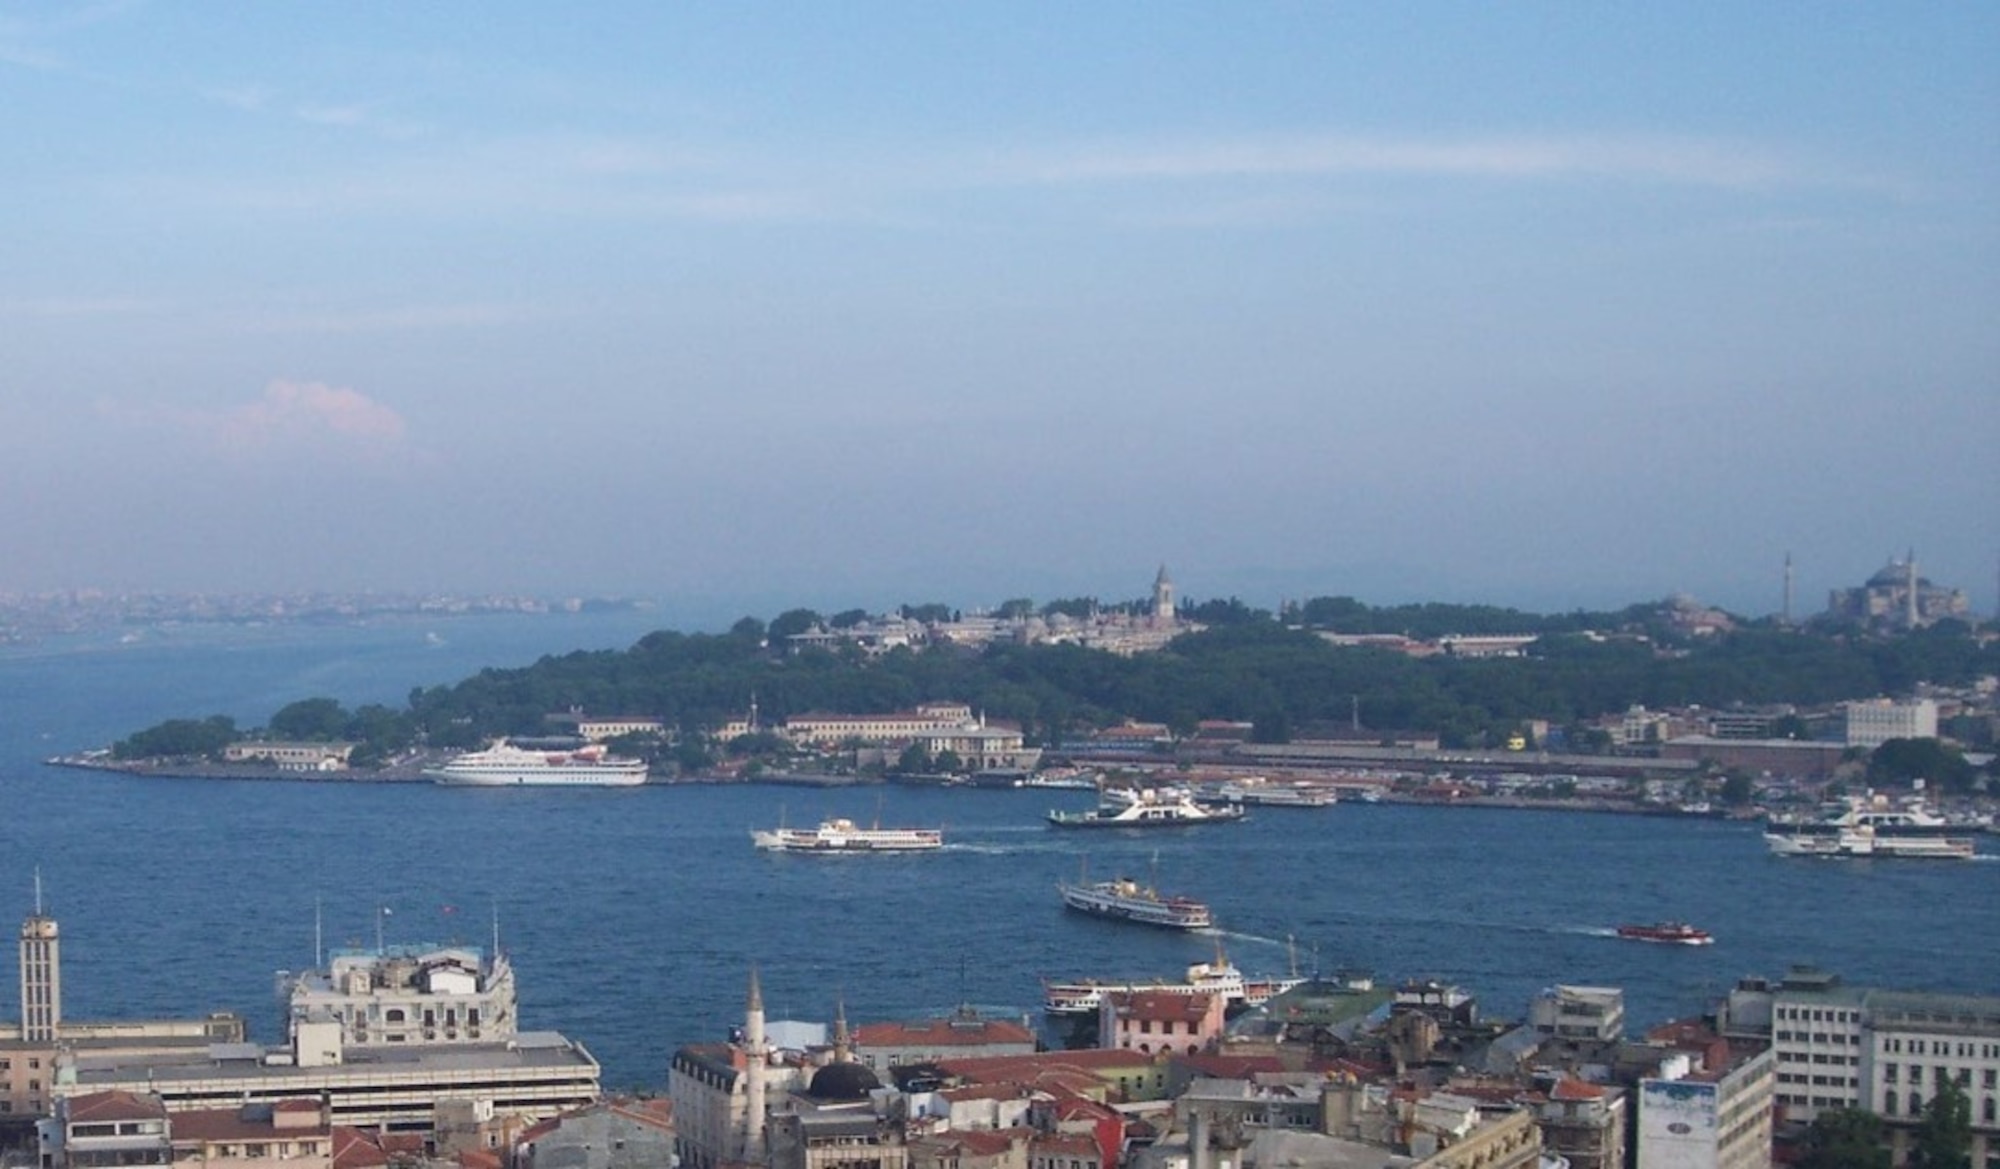 A panoramic view of the Bosphorus and Istanbul from top of the Galata Tower, the oldest and most beautiful tower of Istanbul. (U.S. Air Force photo by Tanju Varlıklı)